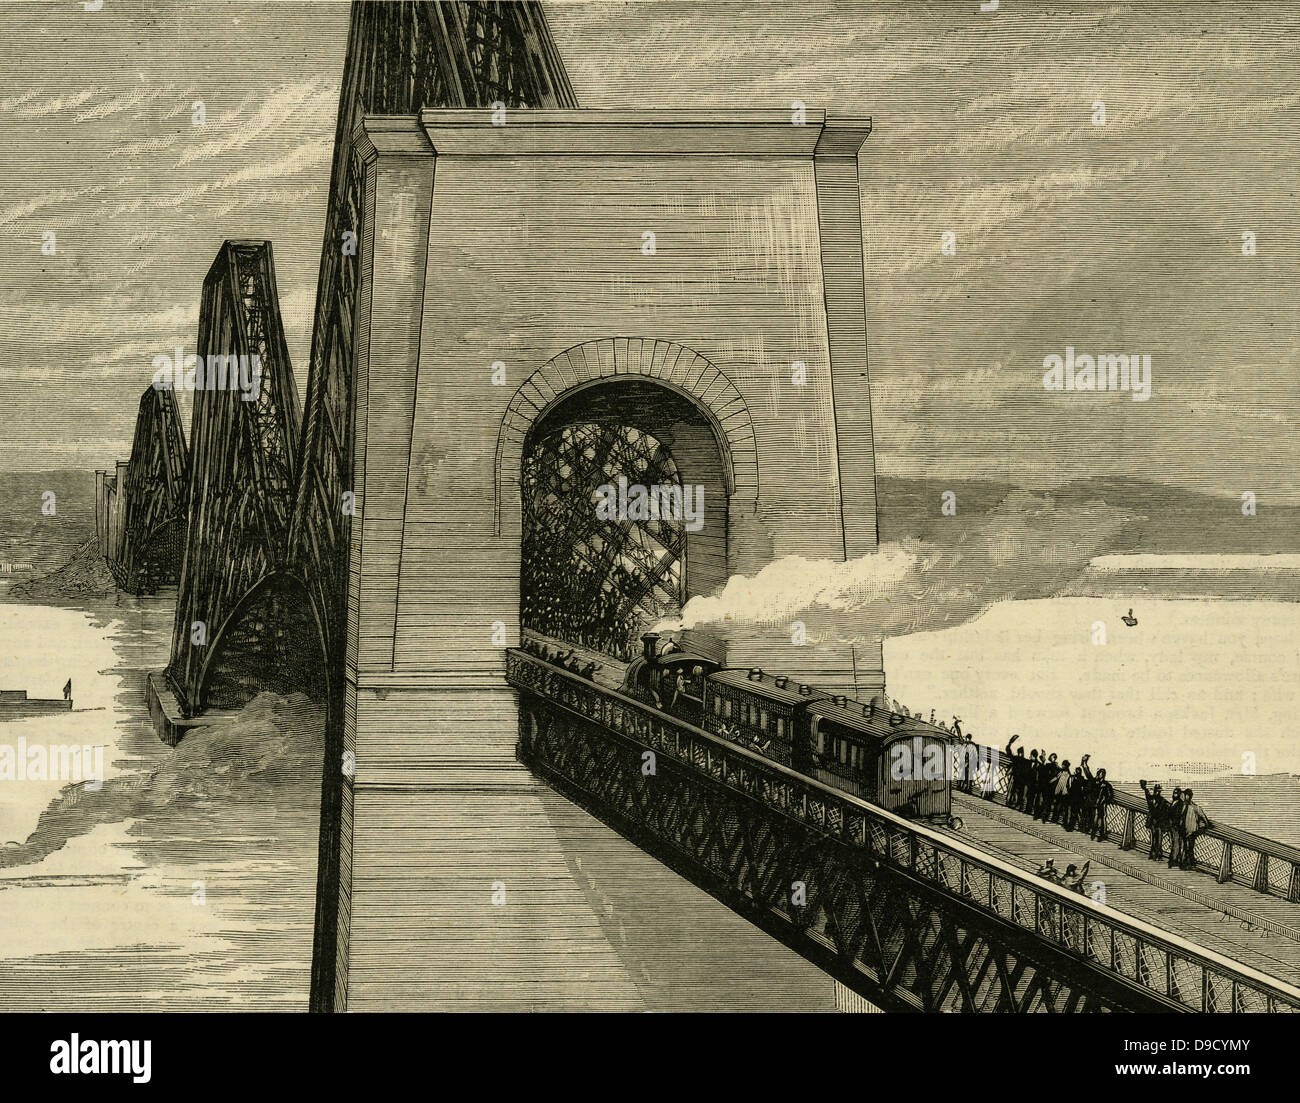 Albums 91+ Images benjamin baker and john fowler designed which famous bridge? Latest